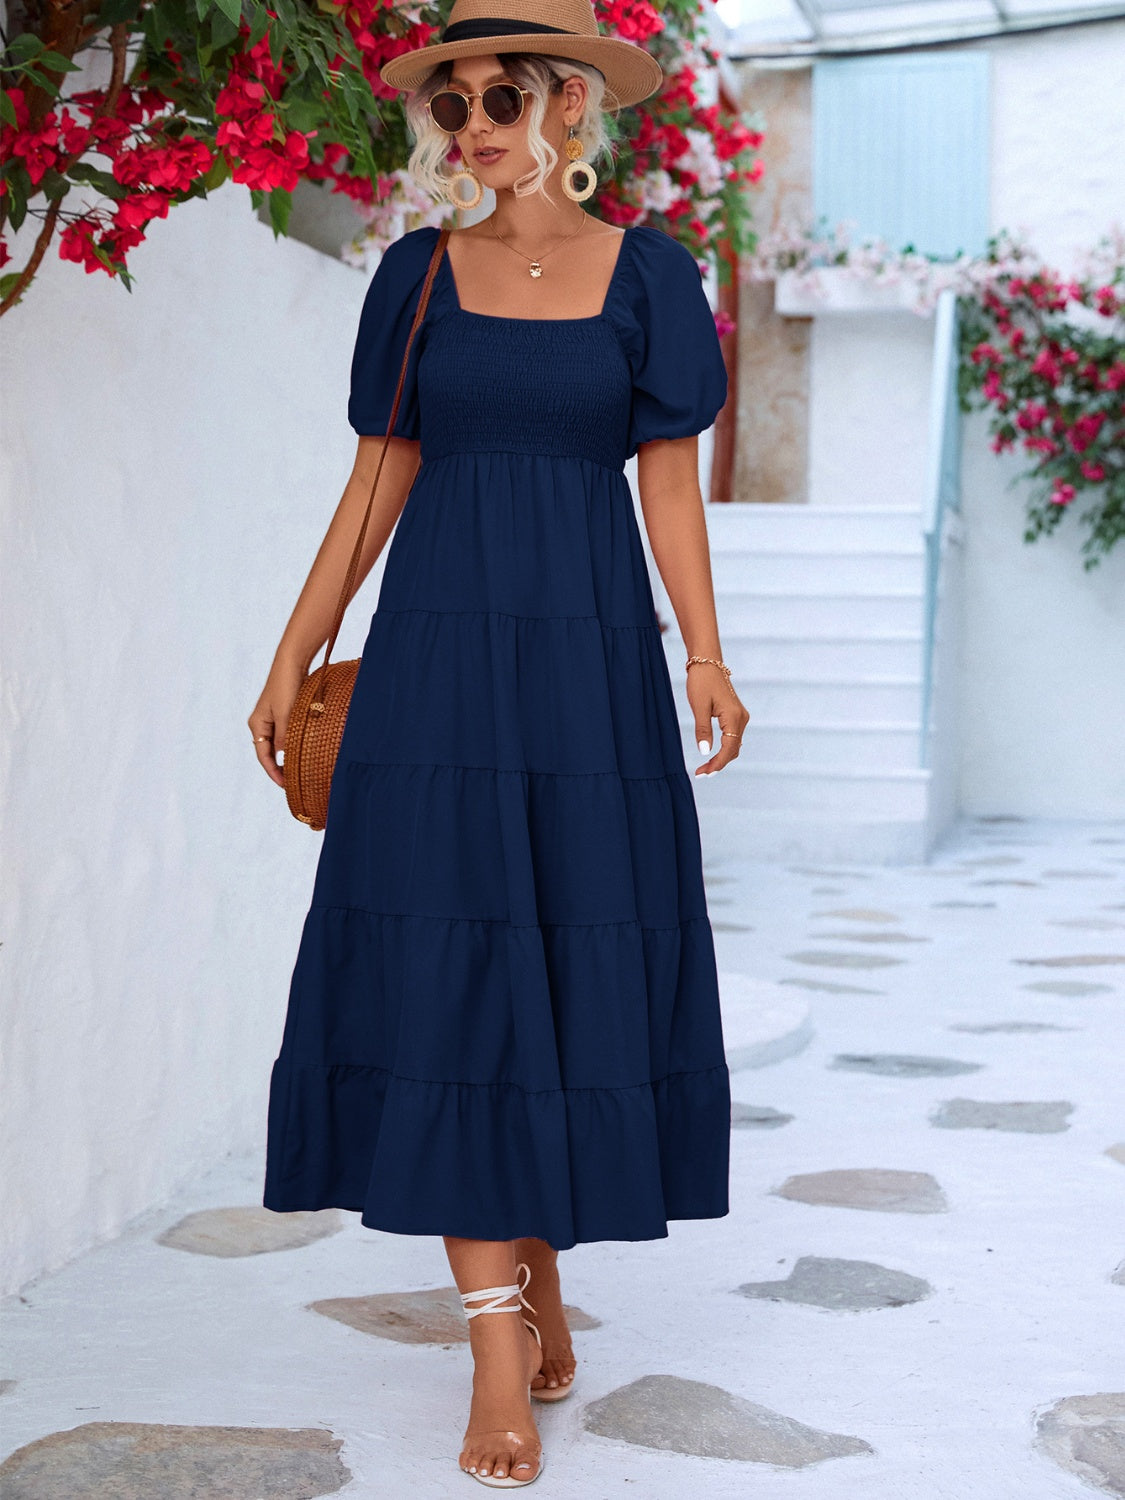 Chic Tiered Smocked Dress in navy, black, & hot pink. Perfect blend of elegance & comfort for any occasion. Shop now for timeless style!